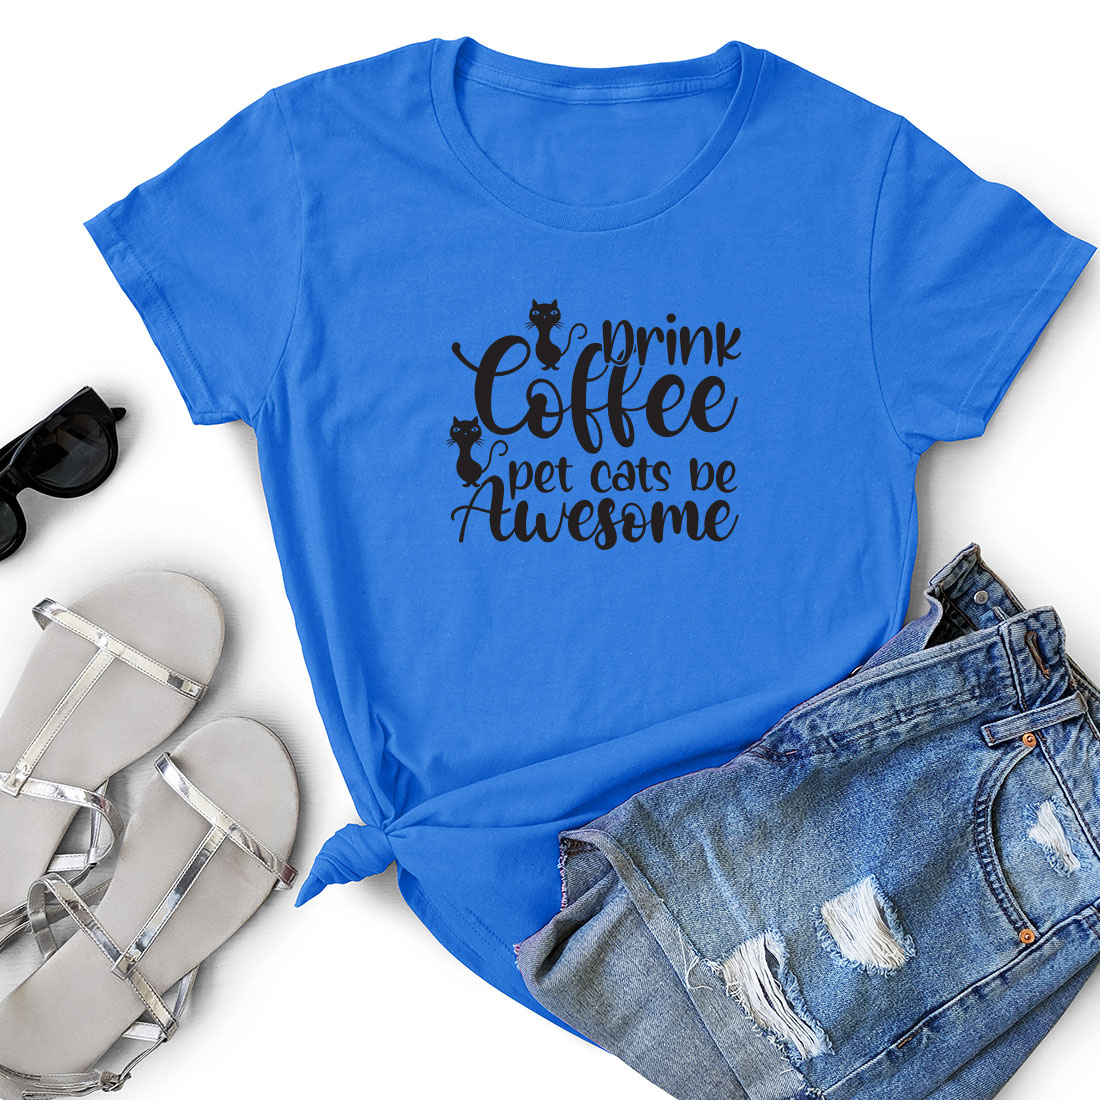 T - shirt with the words spring coffee and a pair of shorts.